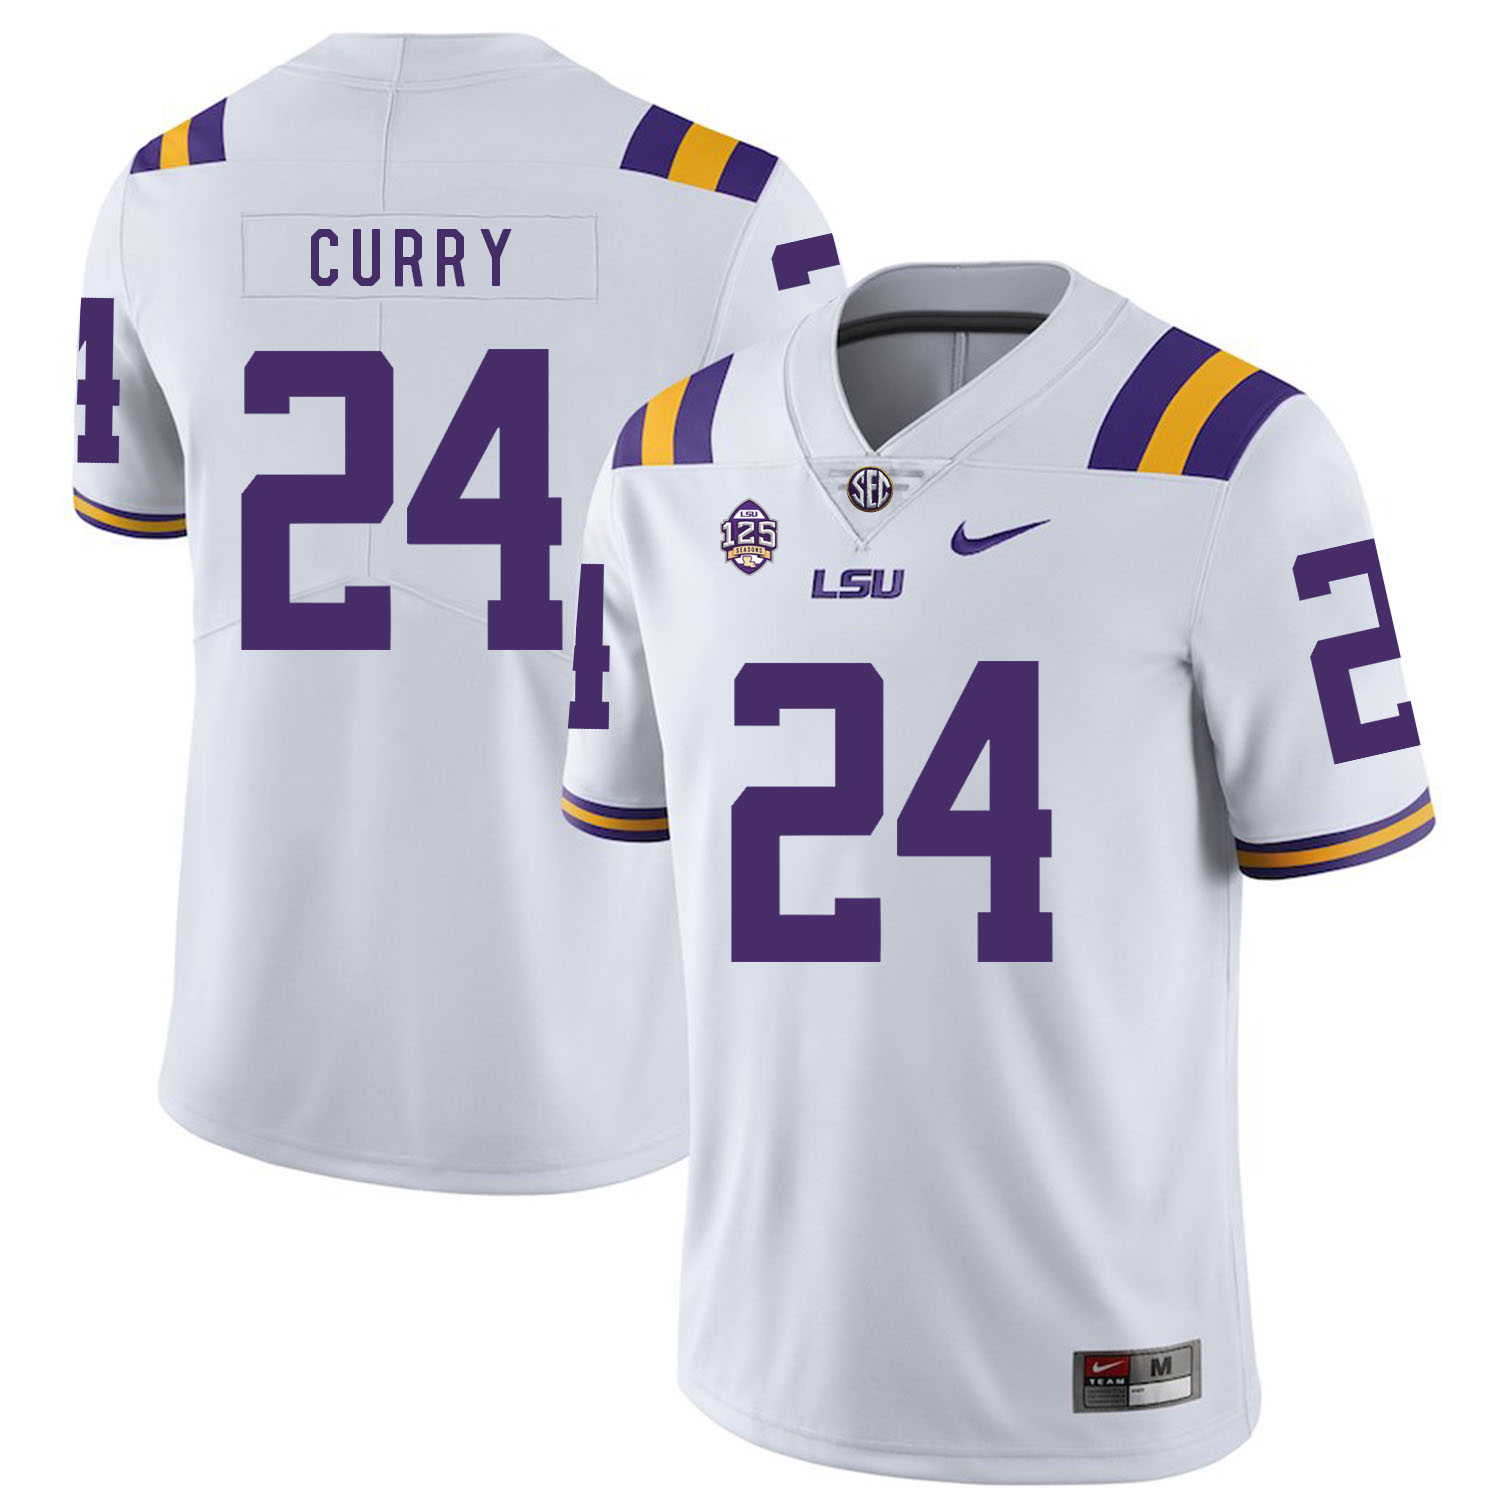 LSU Tigers 24 Chris Curry White Nike College Football Jersey